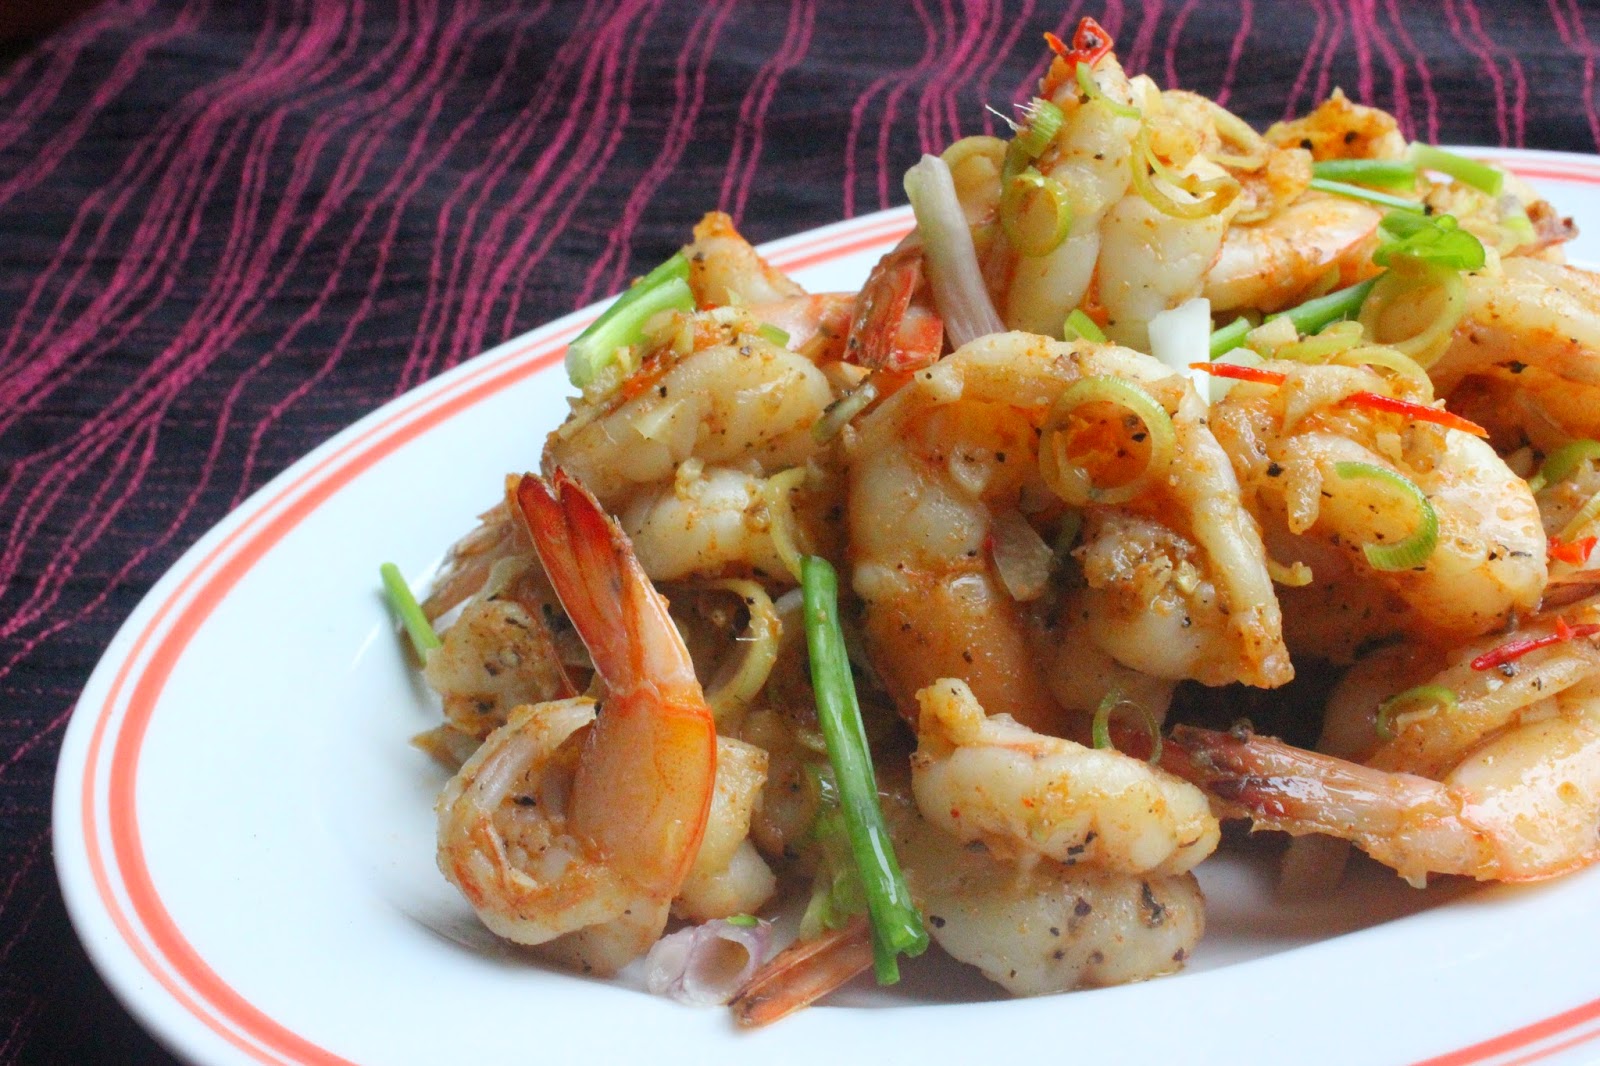 The Morning After: SPICY LEMONGRASS PRAWNS